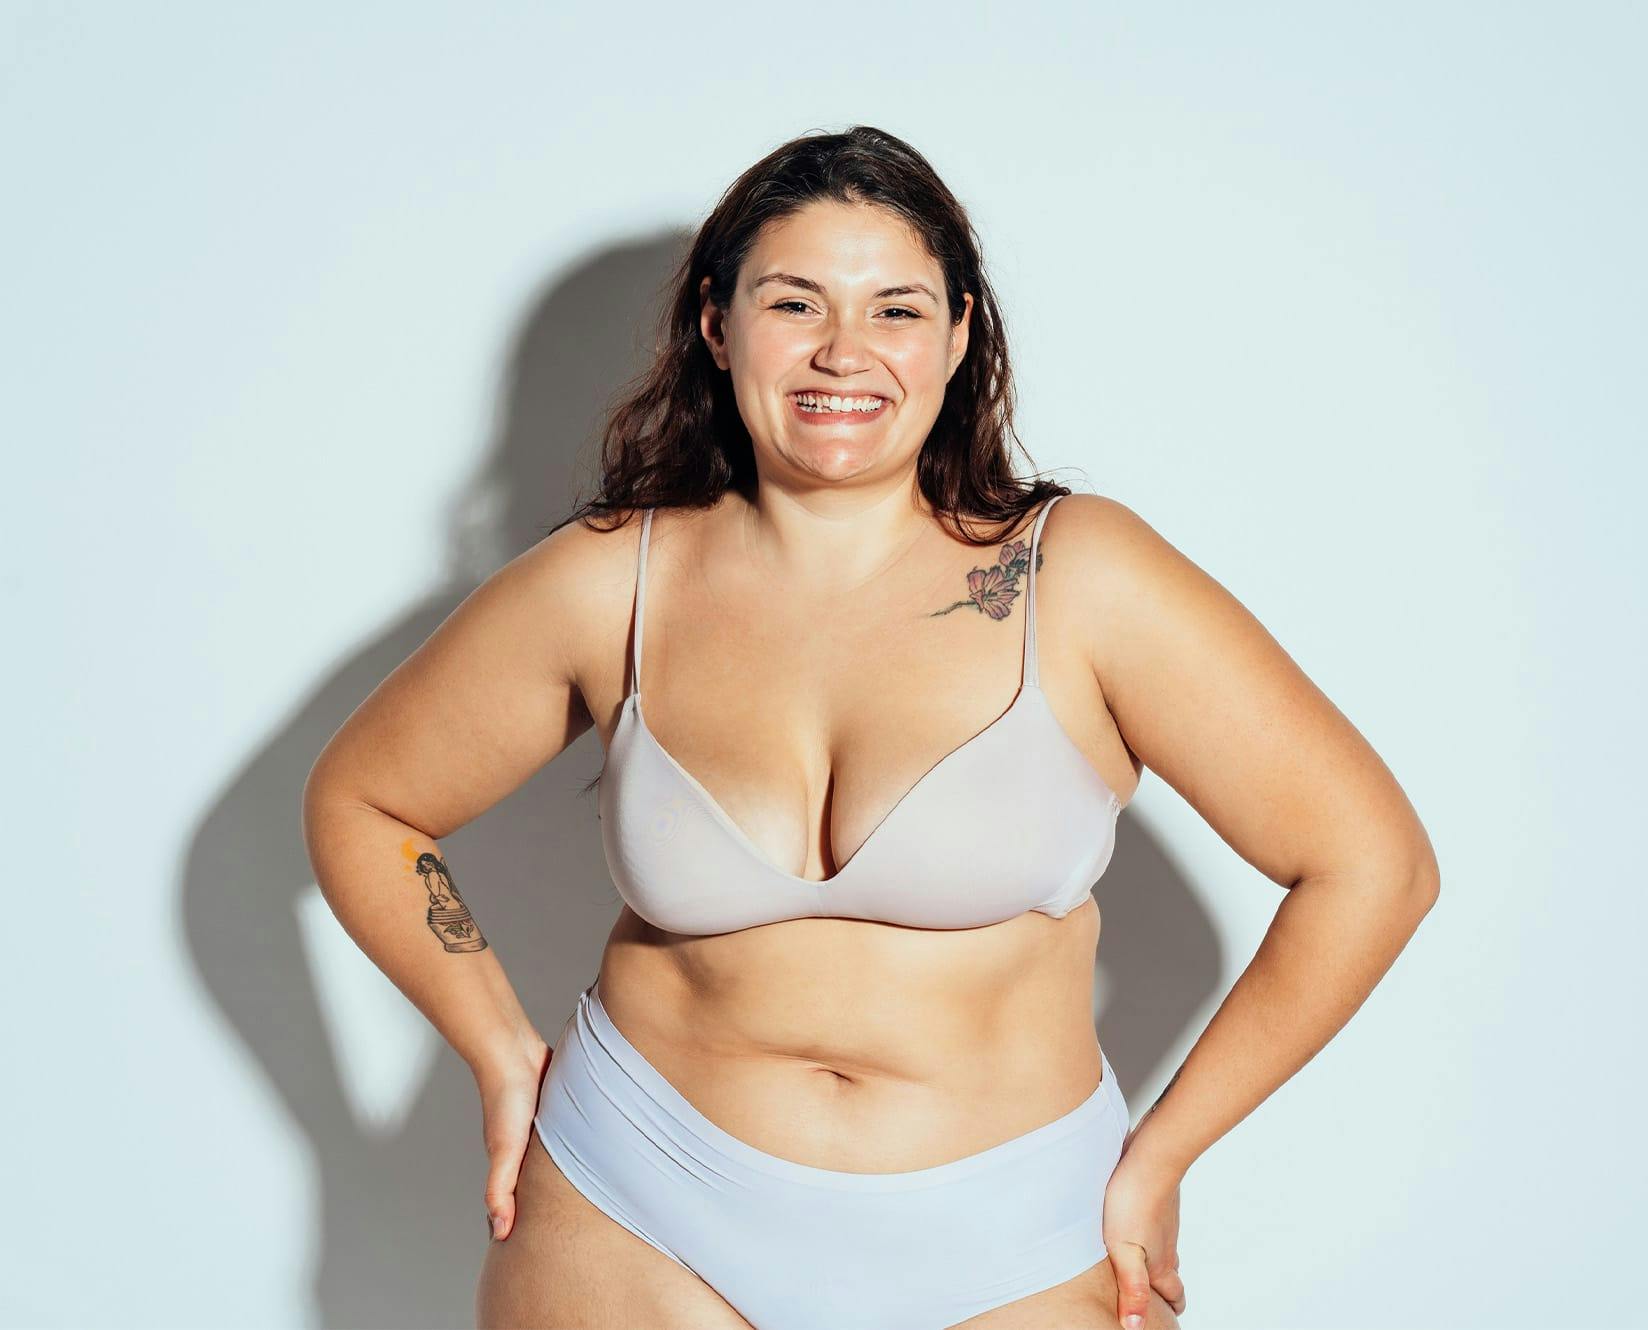 plus size woman in white underwear, with both hands on hips smiling